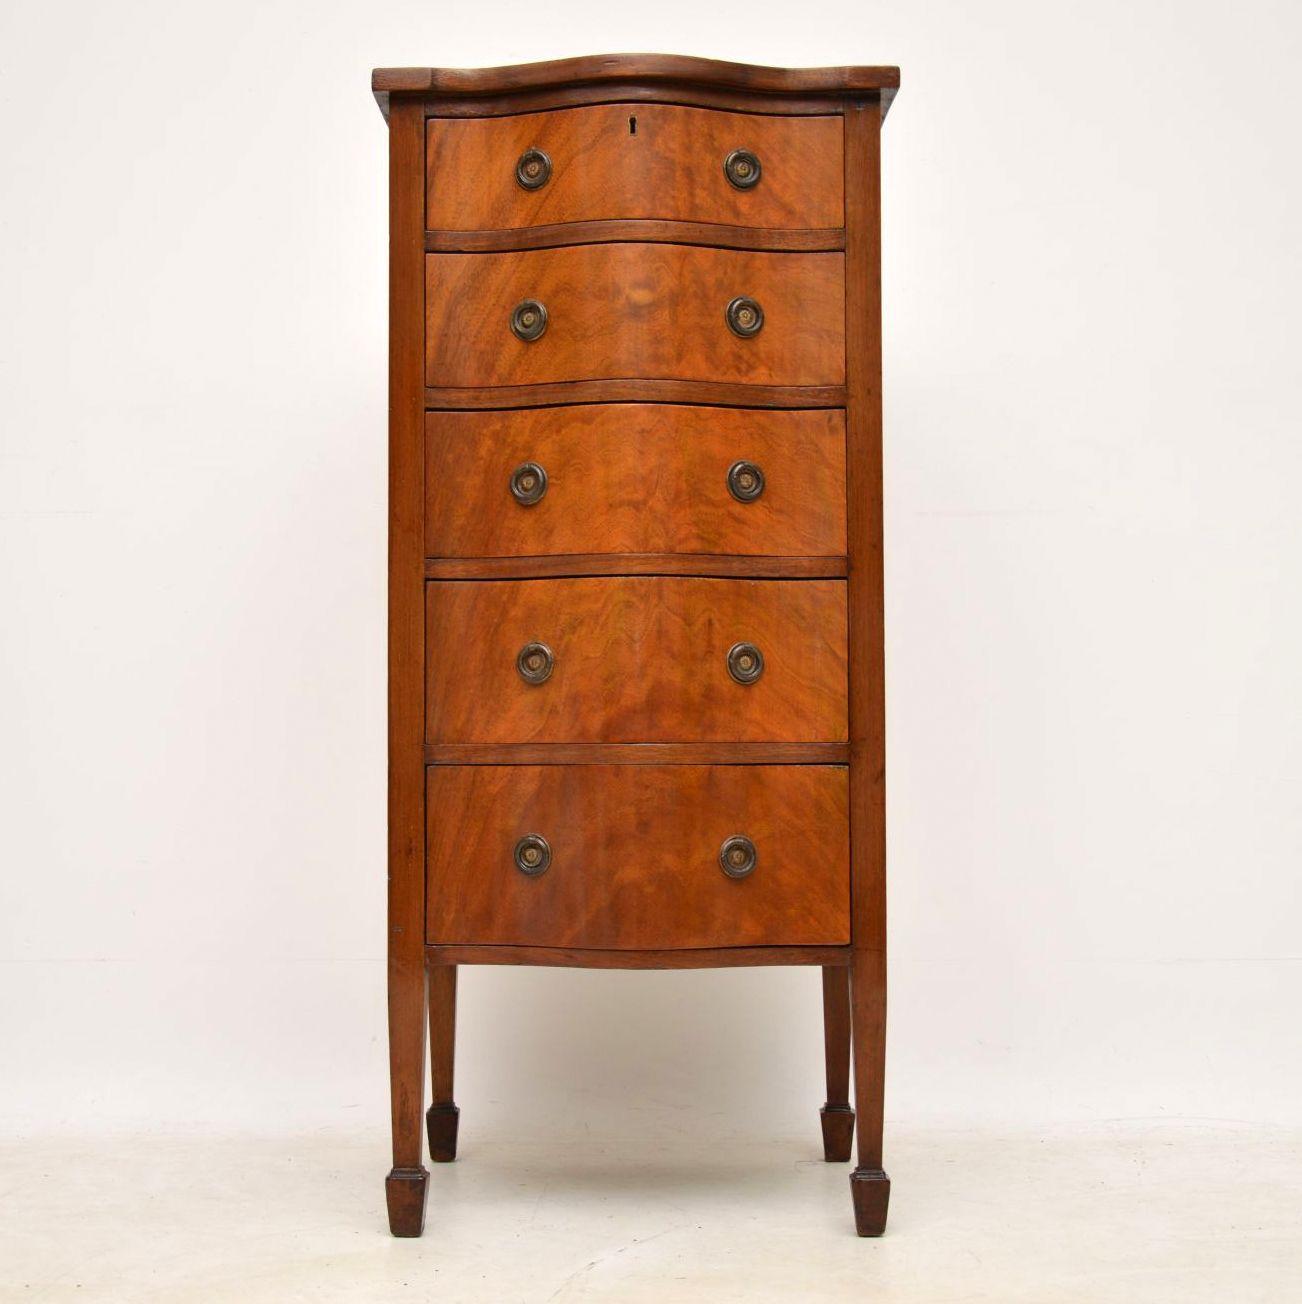 Slim antique Edwardian mahogany chest of drawers with a serpentine shaped front and sitting on spade end legs. It’s in good original condition and has nice warm colour. The drawers are graduated in depth and have the original brass handles. Antique